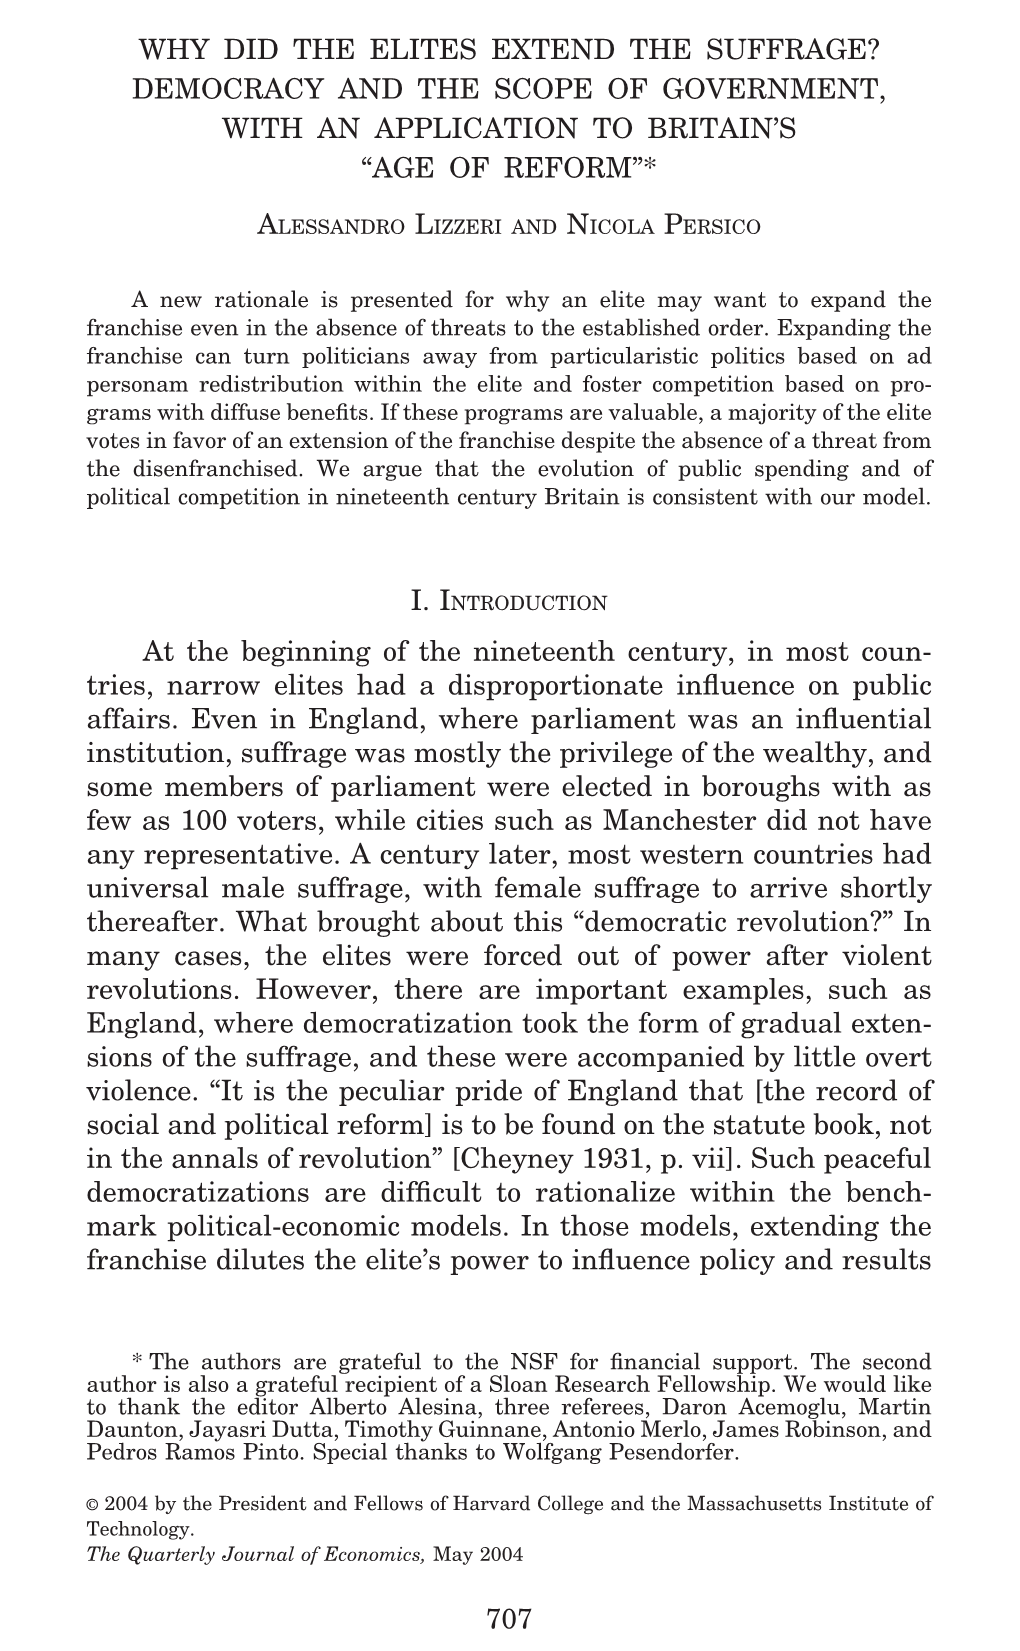 Why Did the Elites Extend the Suffrage? Democracy and the Scope of Government, with an Application to Britain’S “Age of Reform”*